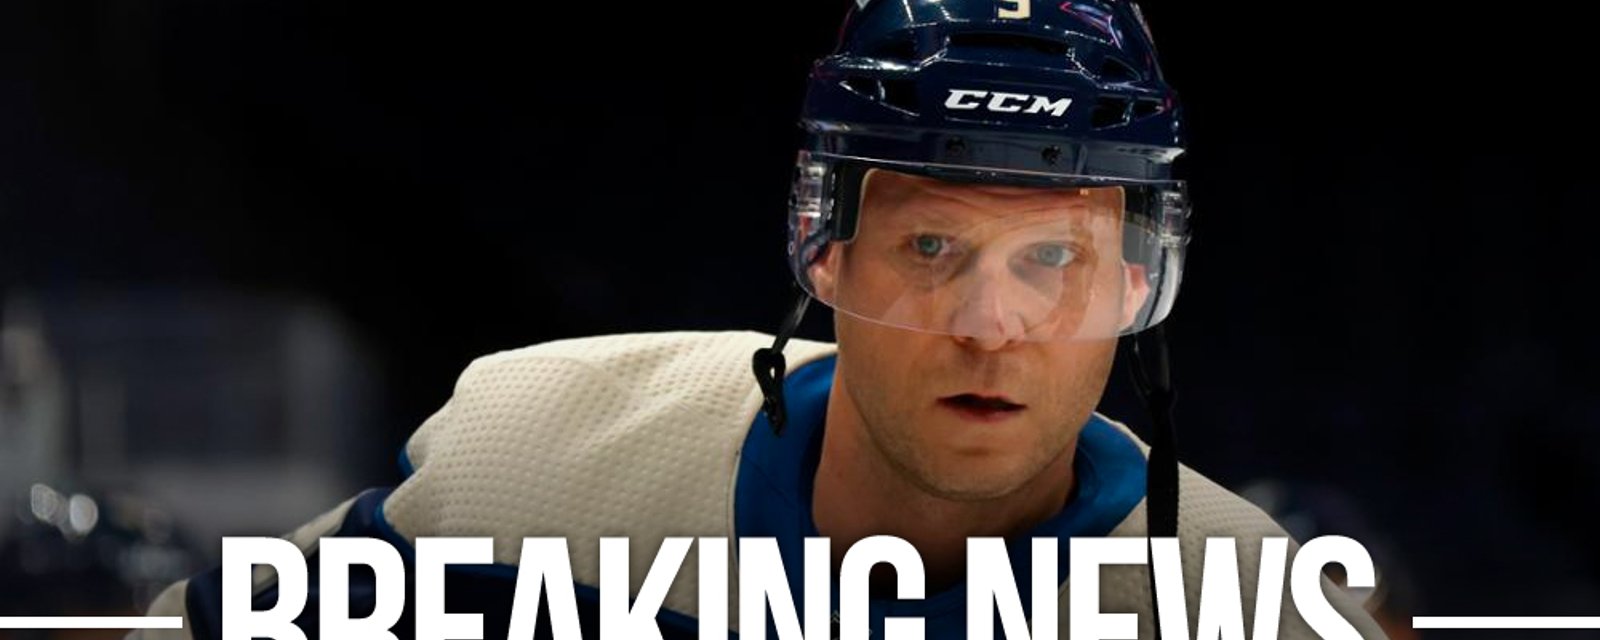 Koivu shocks the Blue Jackets and retires after just 7 games